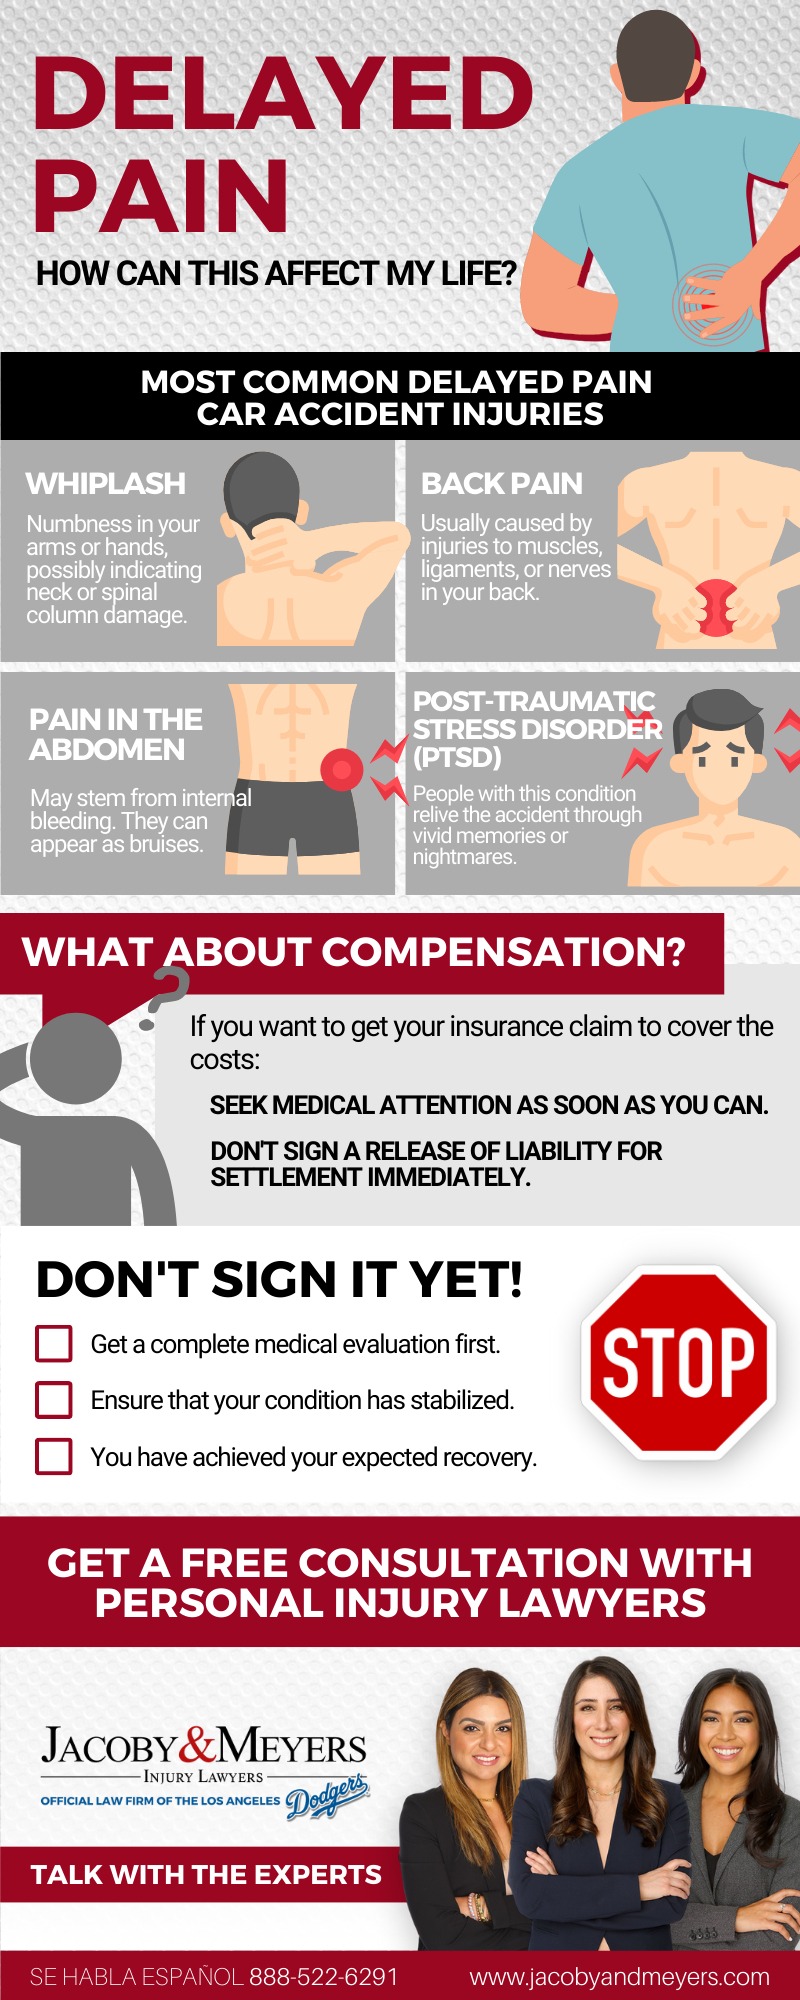 delayed pain car accident infographic